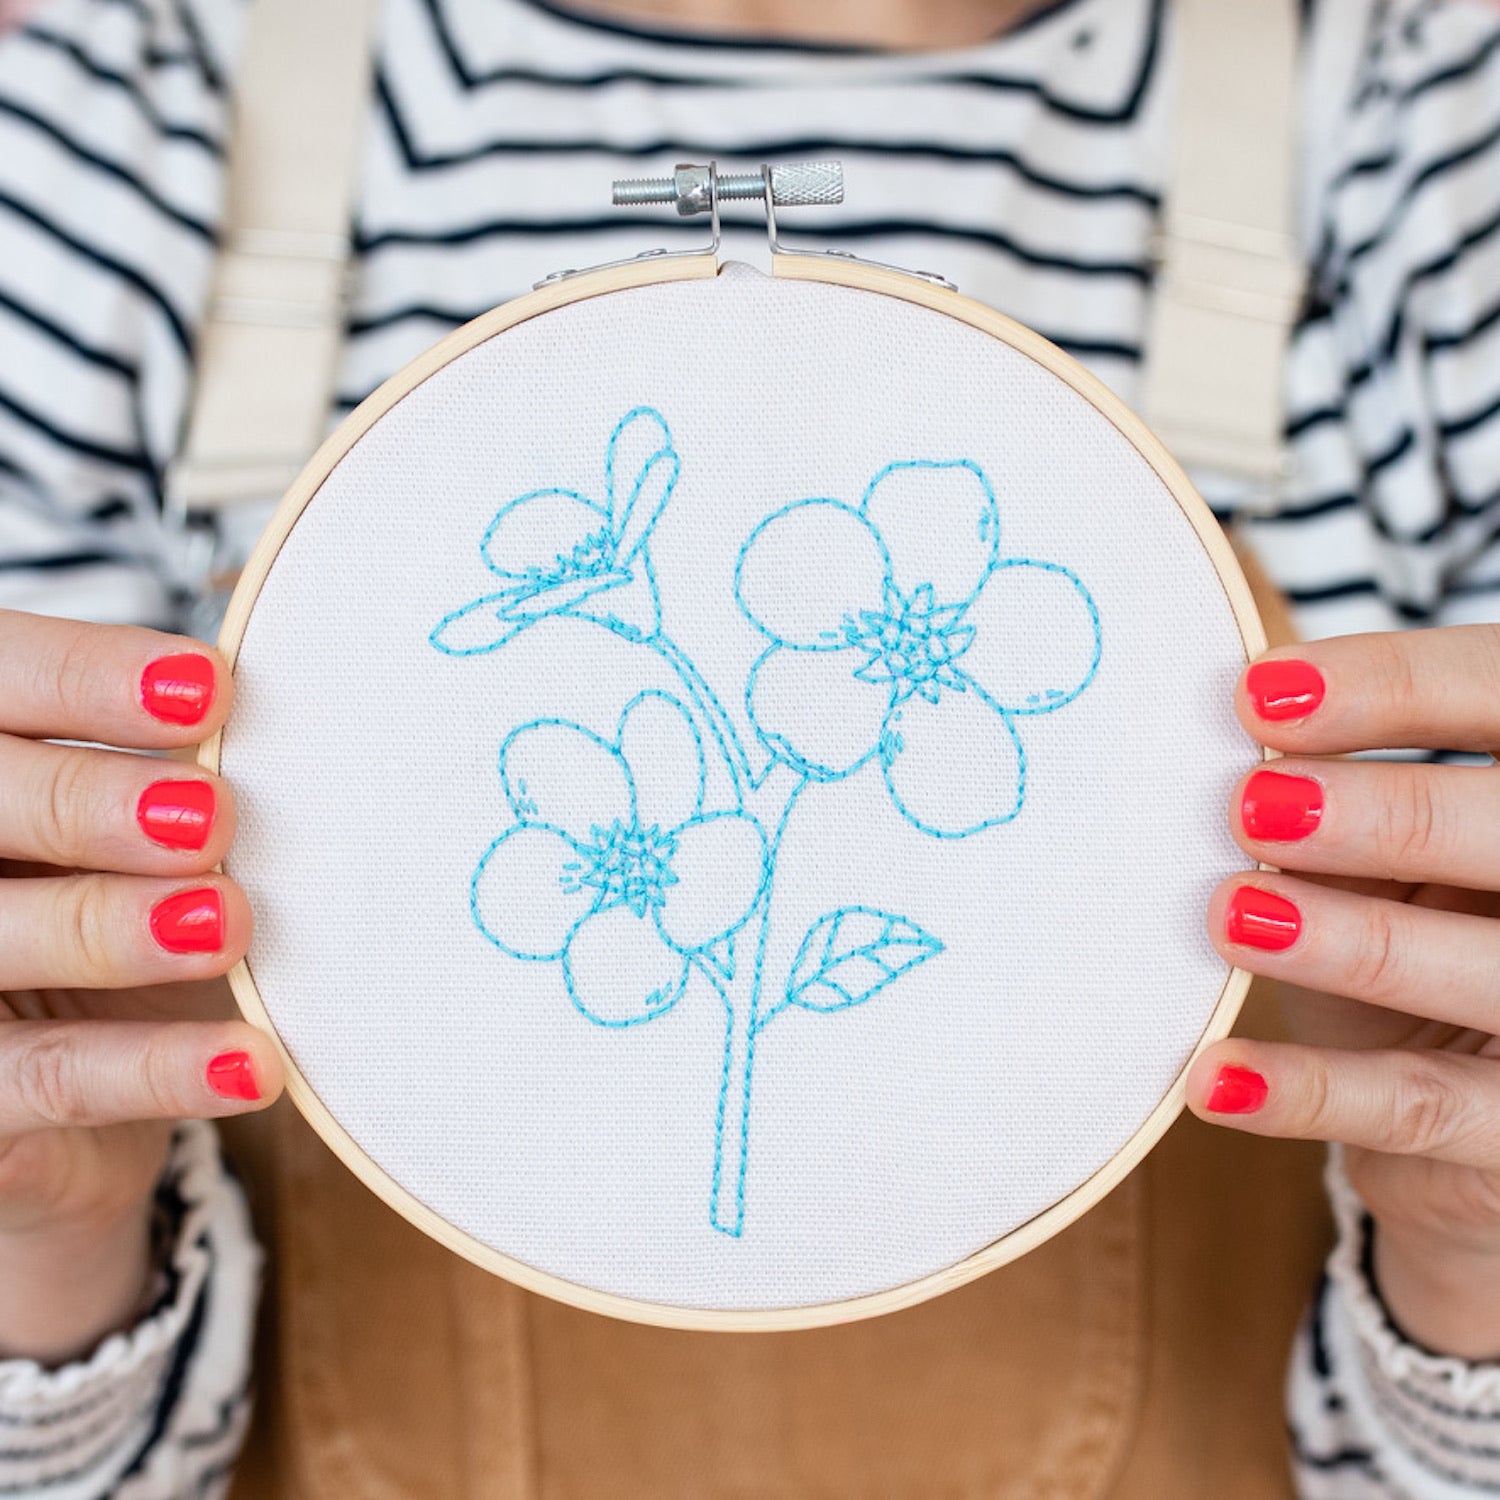 Beginner Embroidery Kit with Pattern and Needle, Hand Stamped Embroidery  Kits for Adults with Instructions Include Color Thread, Plastic Hoop &  Cotton Fabric (Yellow Daisies) 